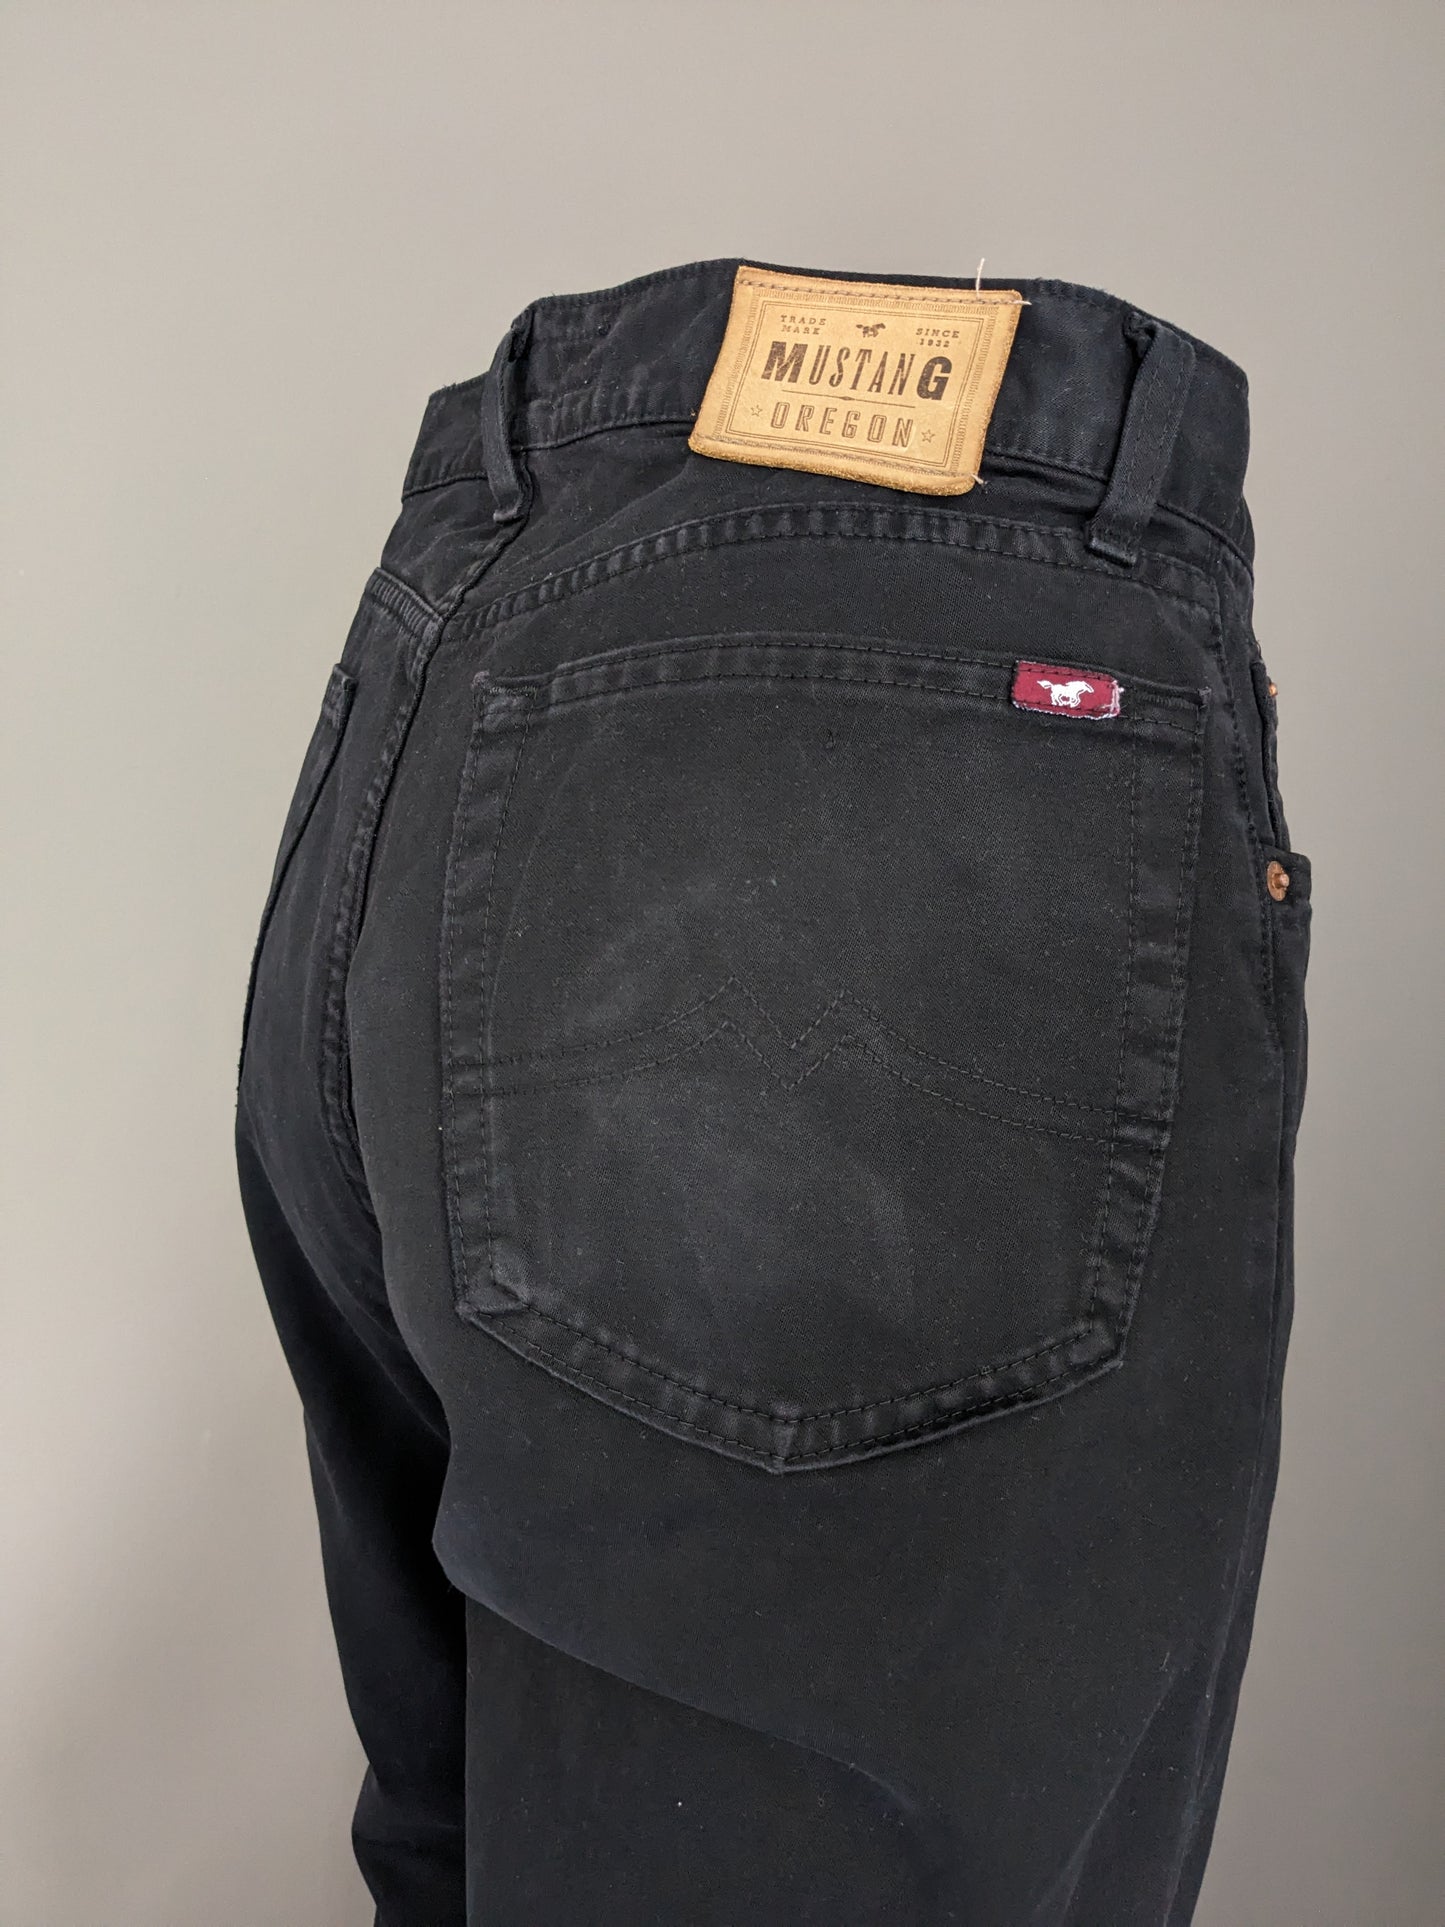 Mustang * Oregon * jeans. Black colored. Size W35 - L36.